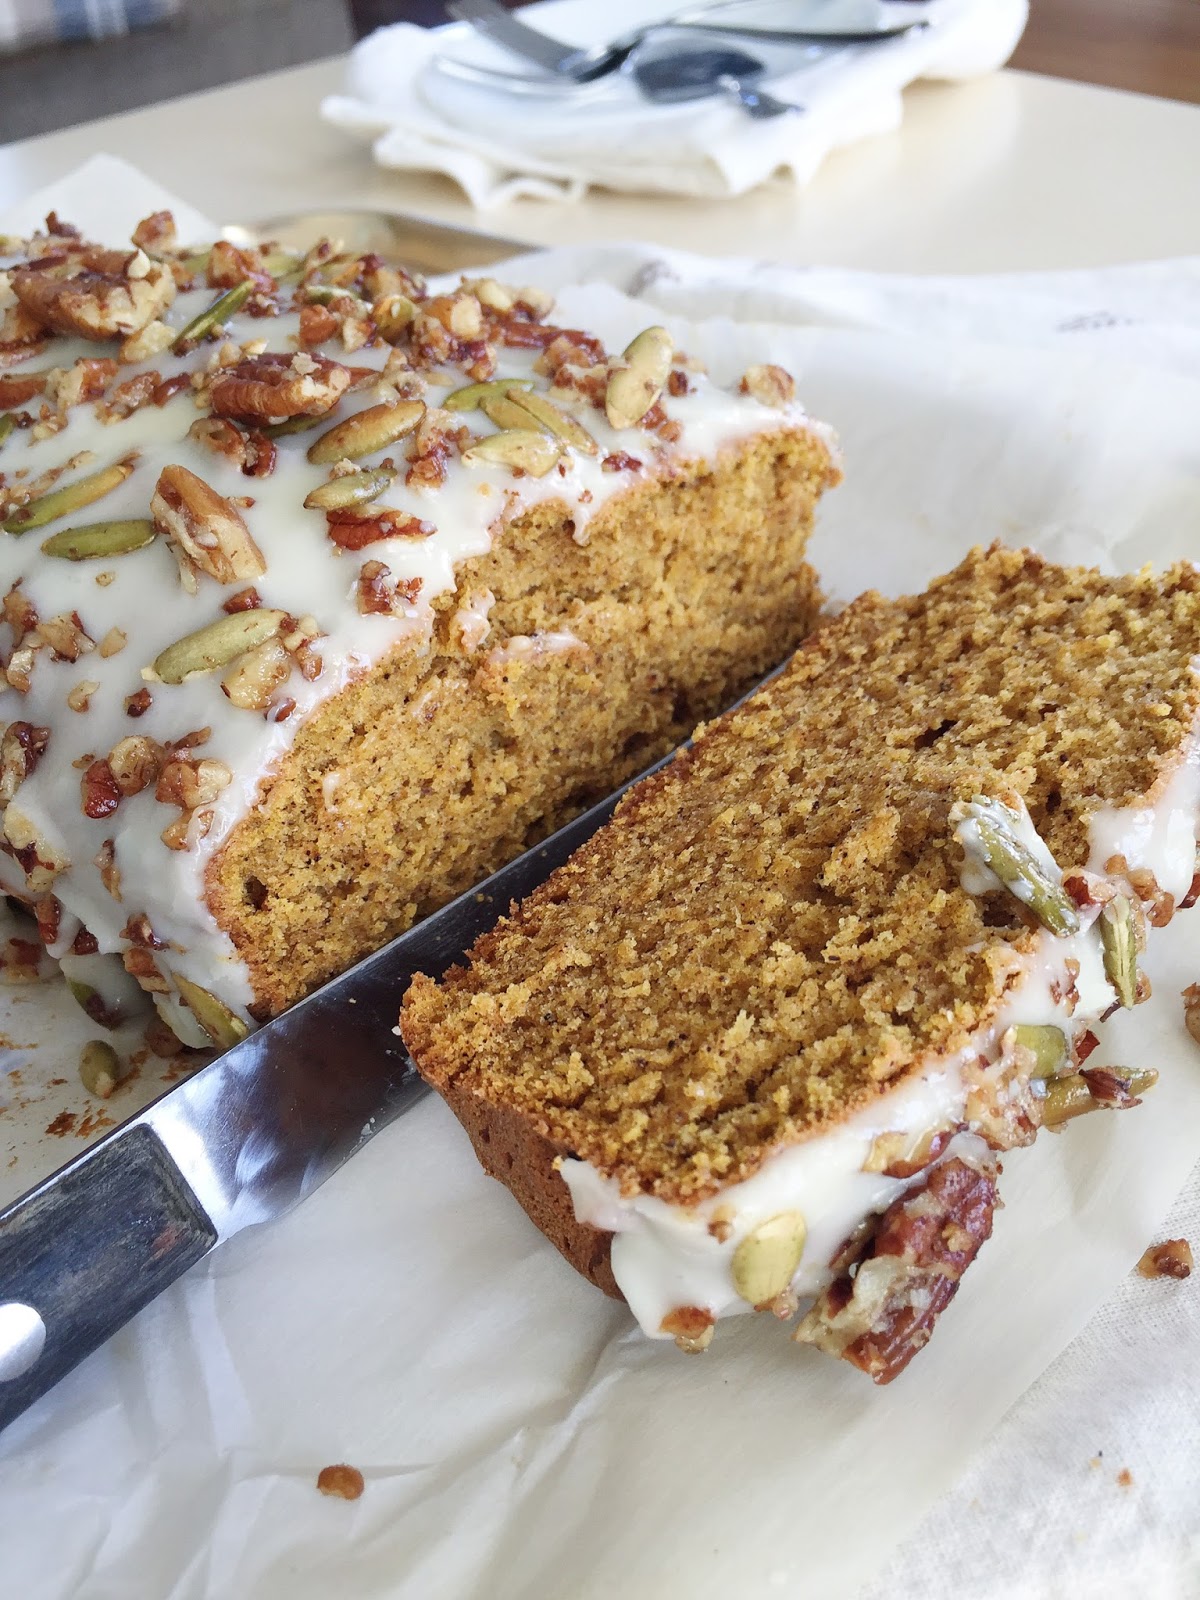 The Cooks in the Kitchen: Pumpkin Gingerbread Loaf